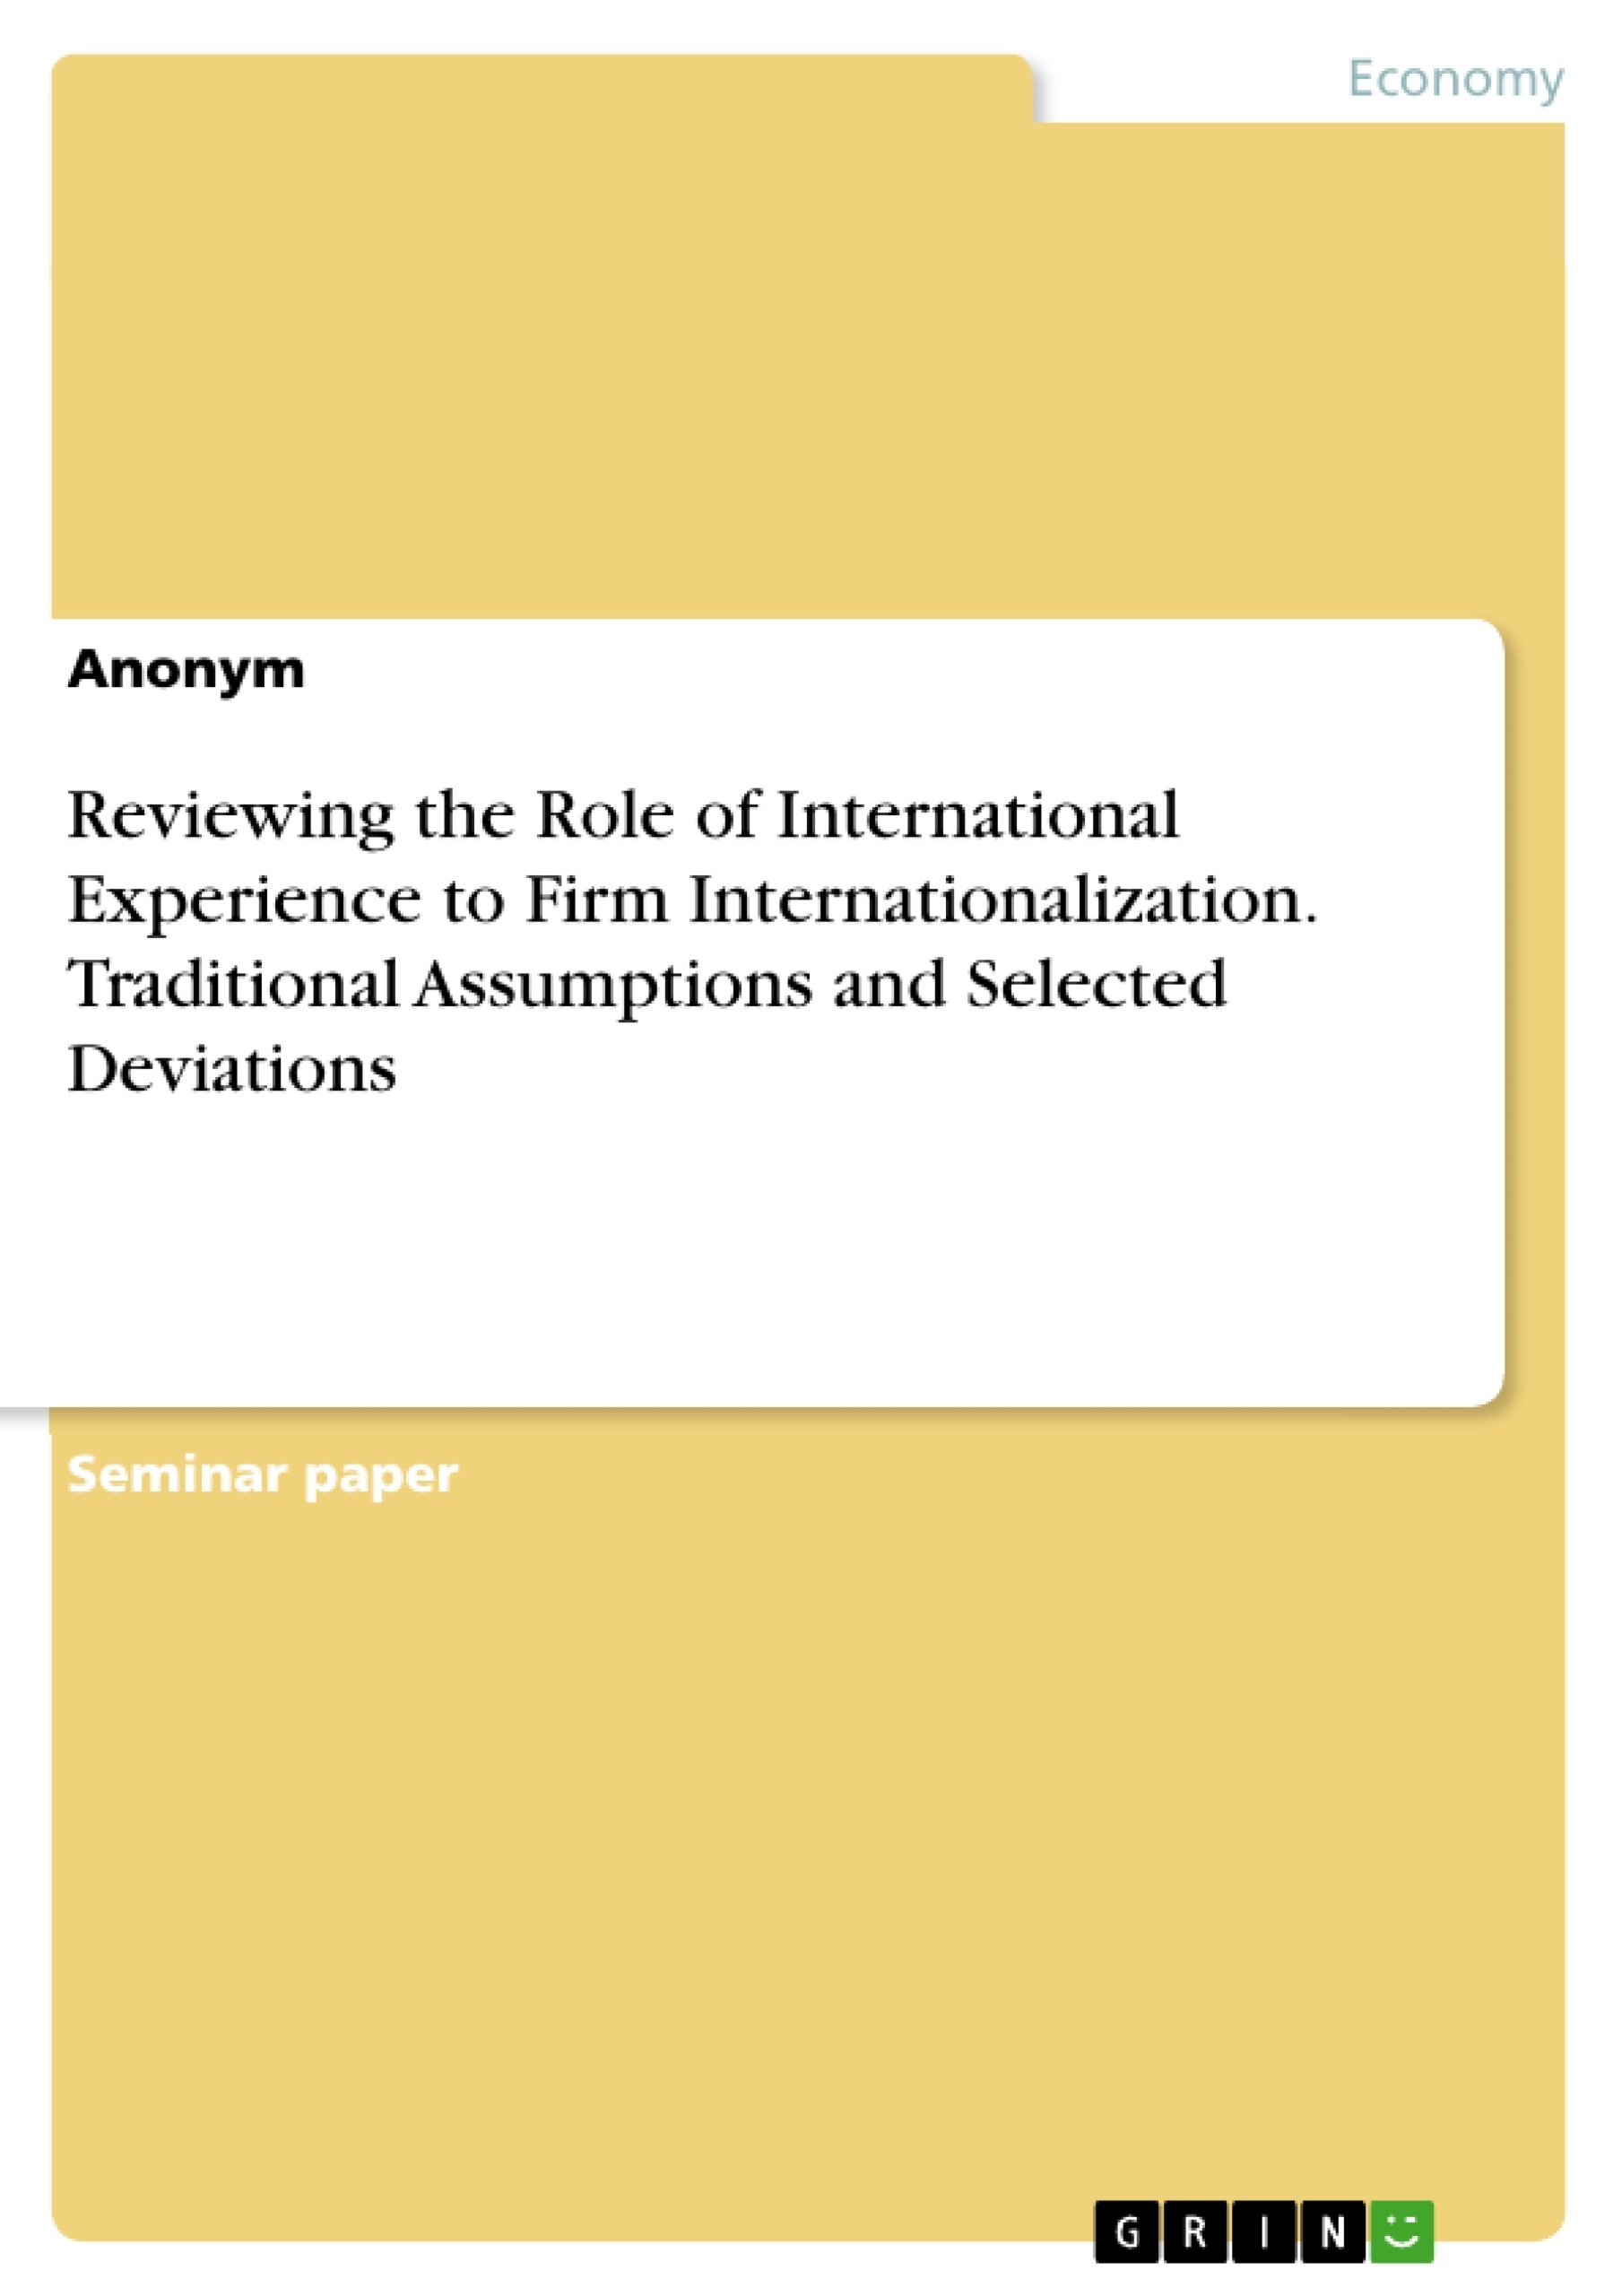 Título: Reviewing the Role of International Experience to Firm Internationalization. Traditional Assumptions and Selected Deviations